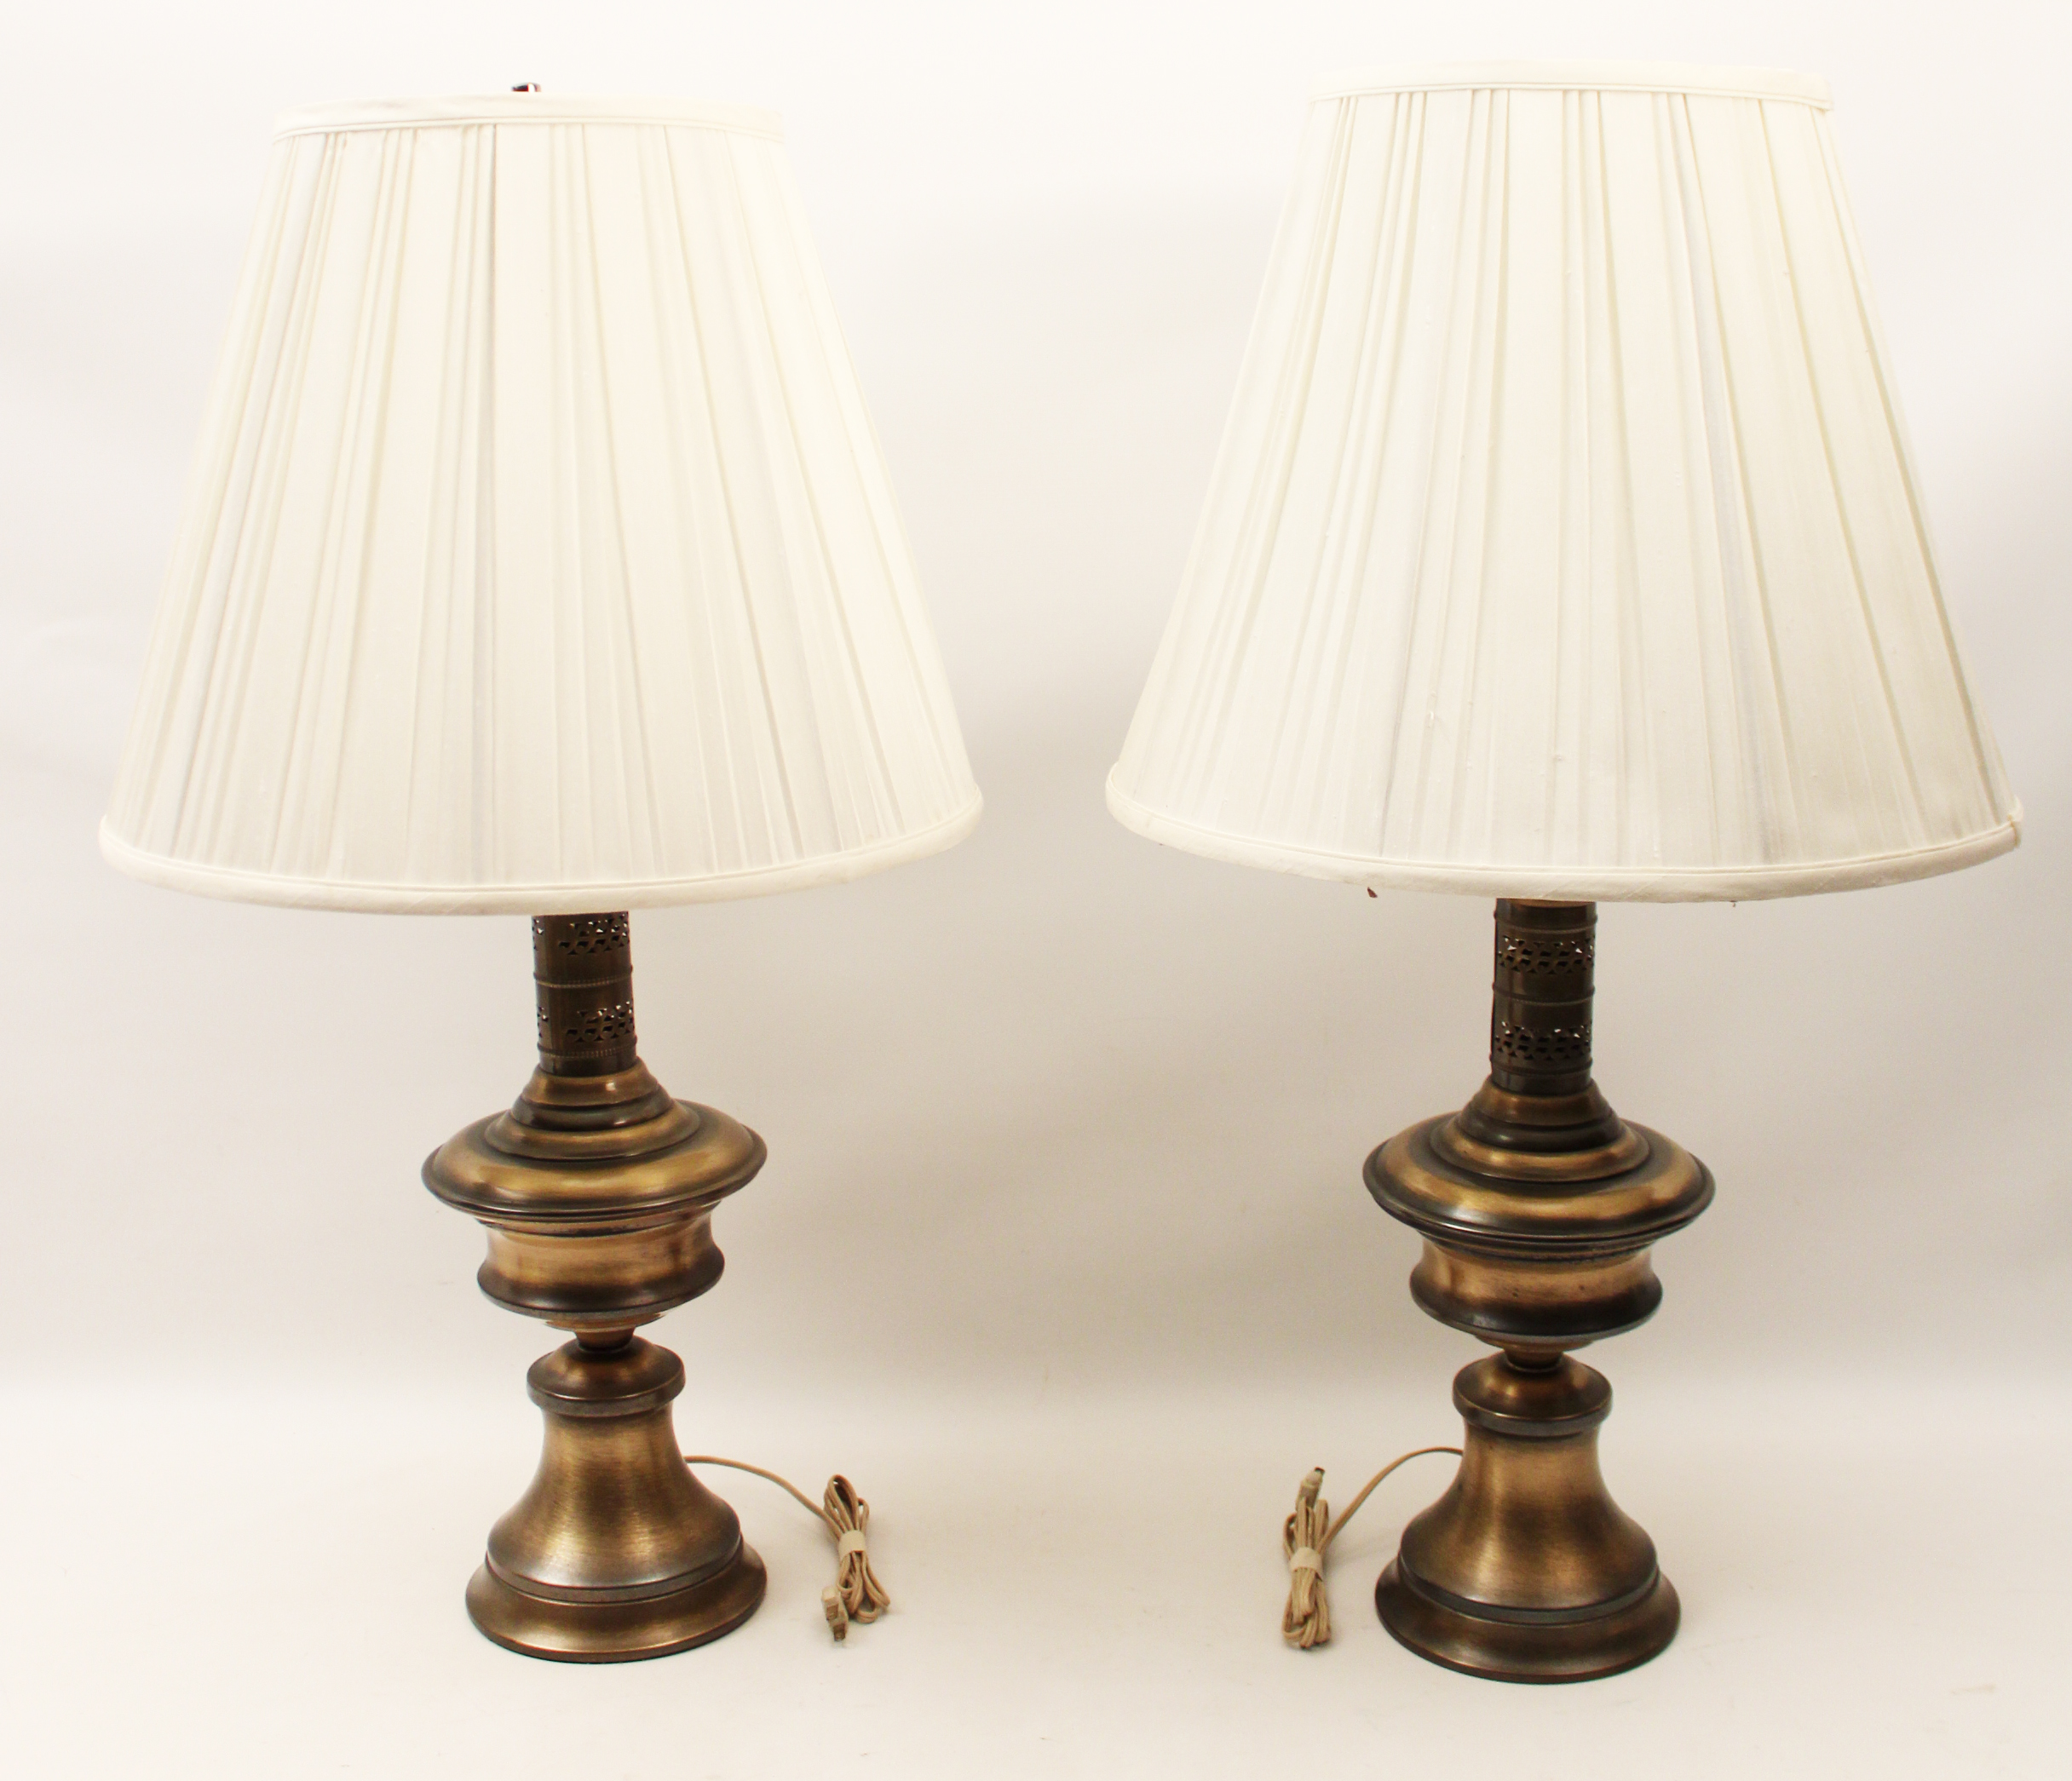 PAIR OF BRASS LAMPS PAIR OF CONTEMPORARY 35f27b